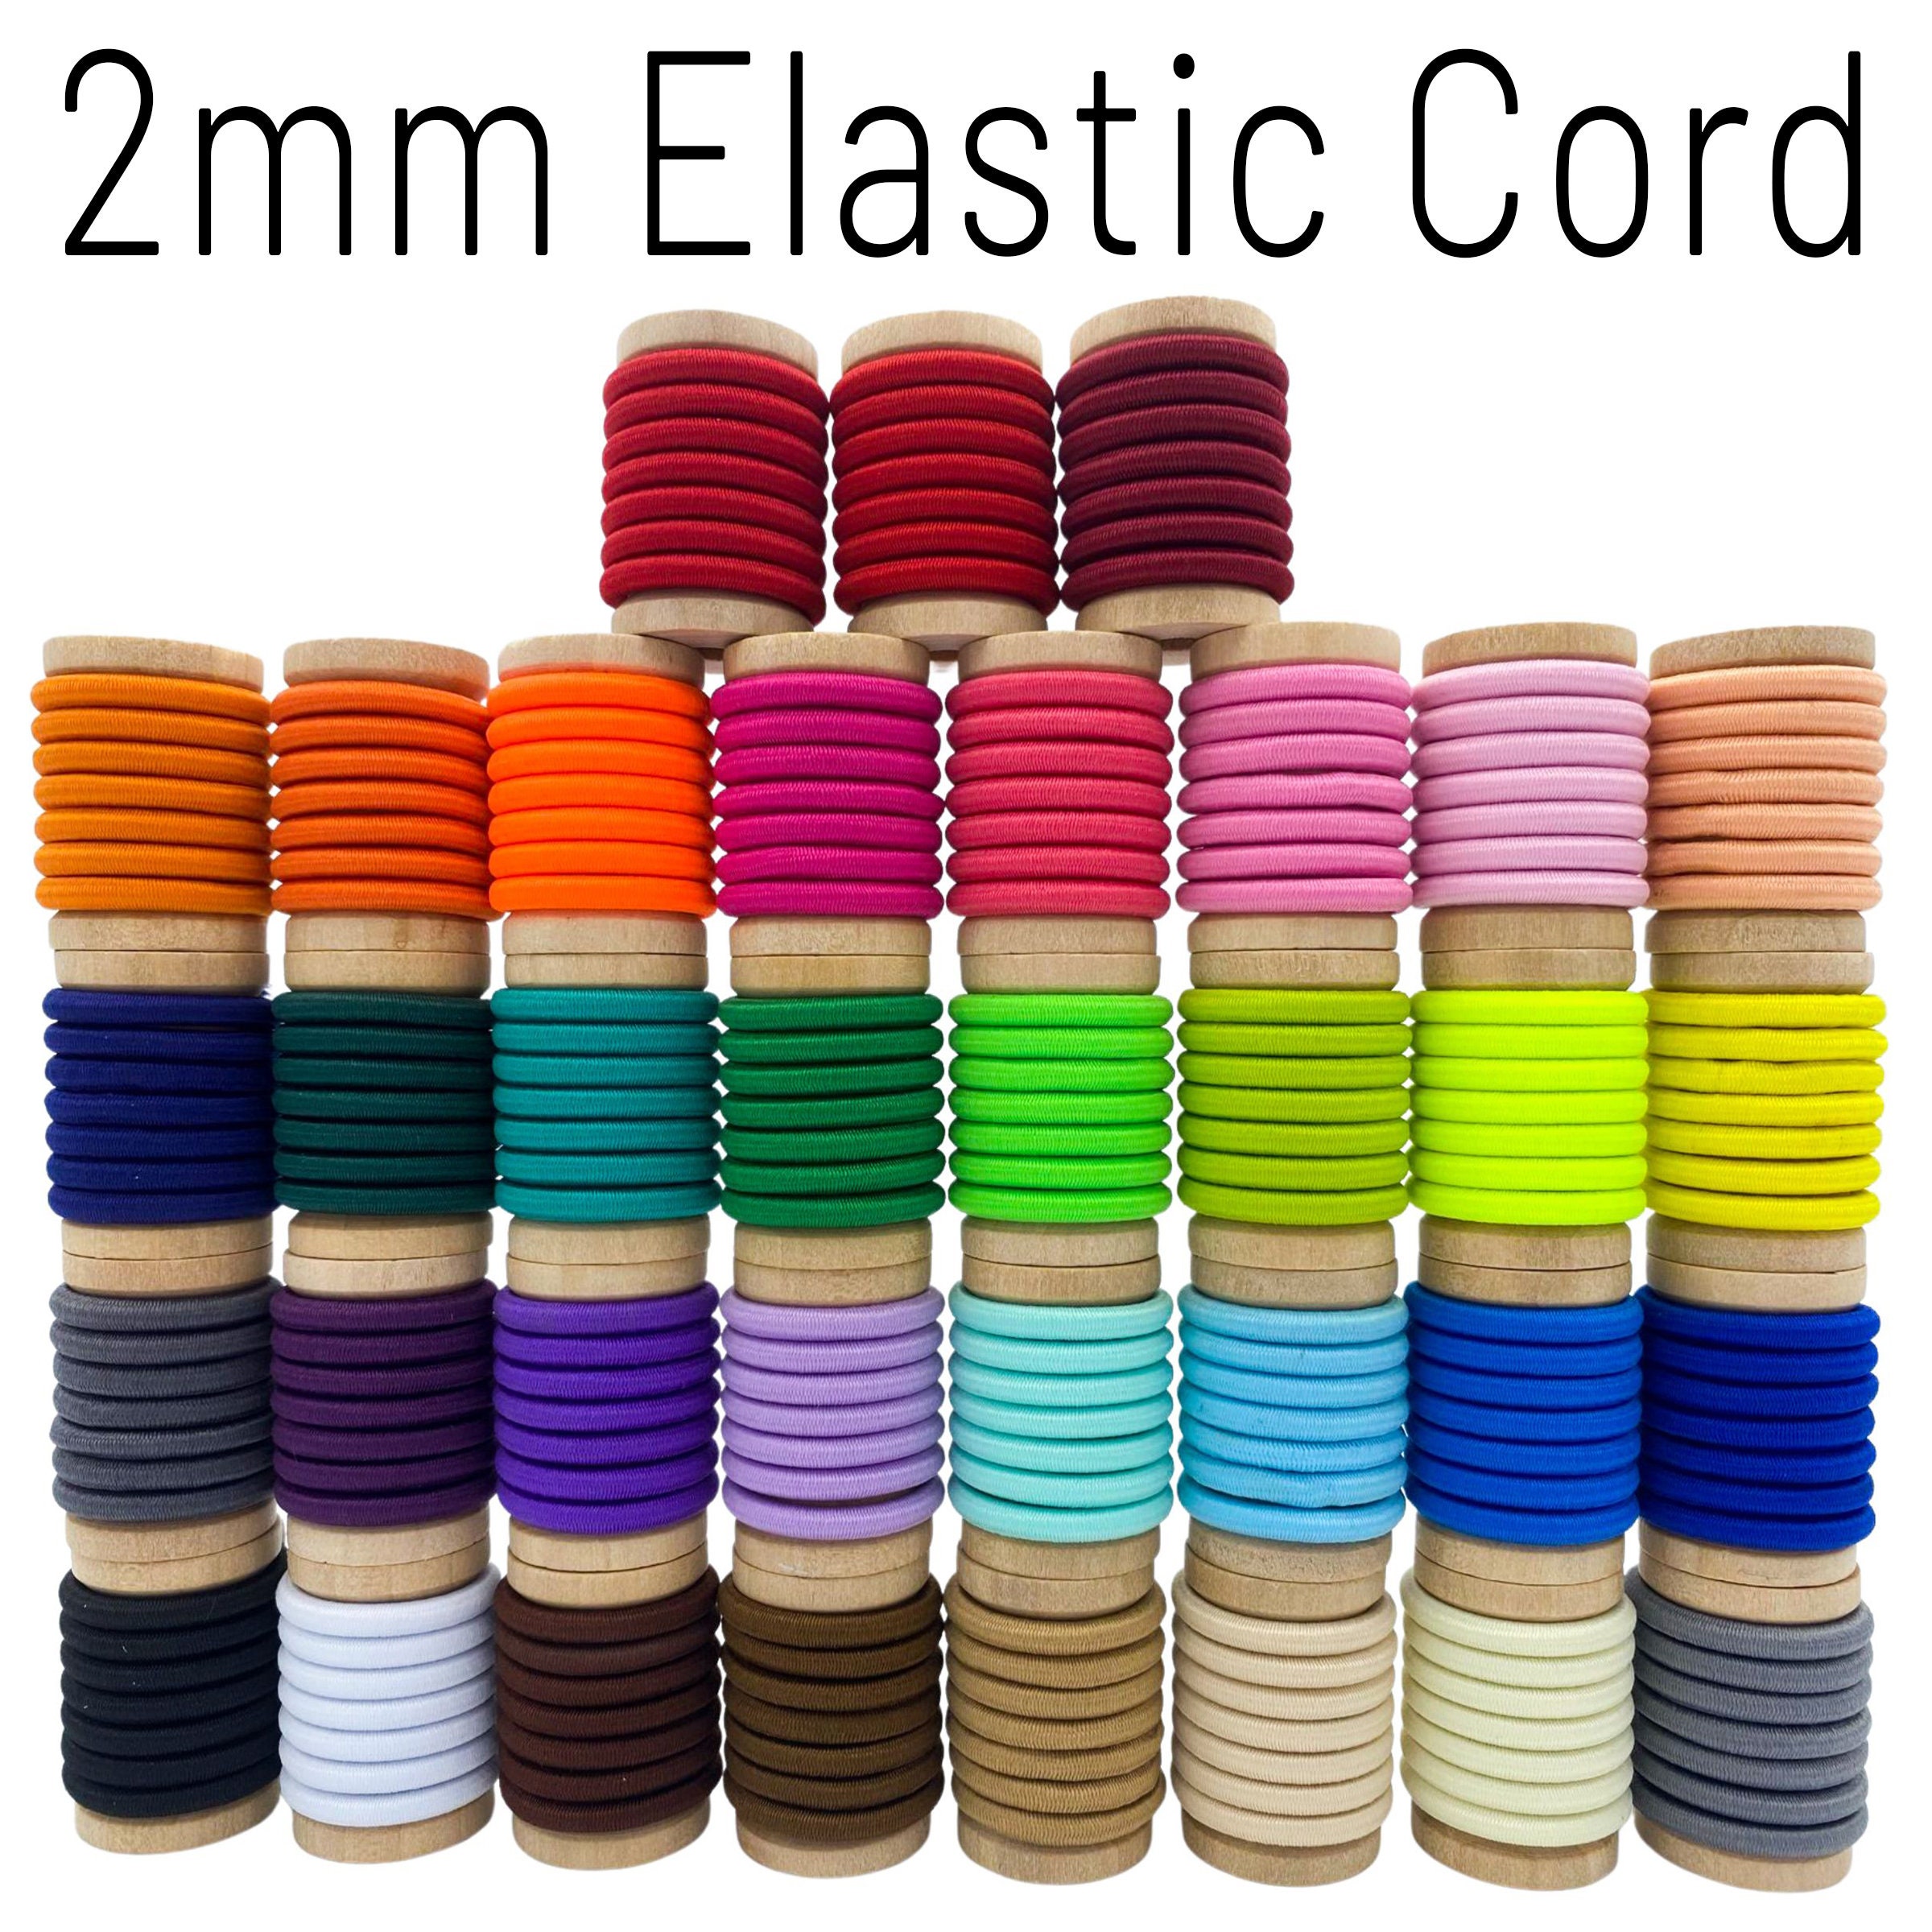 Elastic String for Bracelets Making - Black Elastic Cord 1.2mm Total 109  Yards, for Jewelry Making, Necklaces, Beading - AliExpress